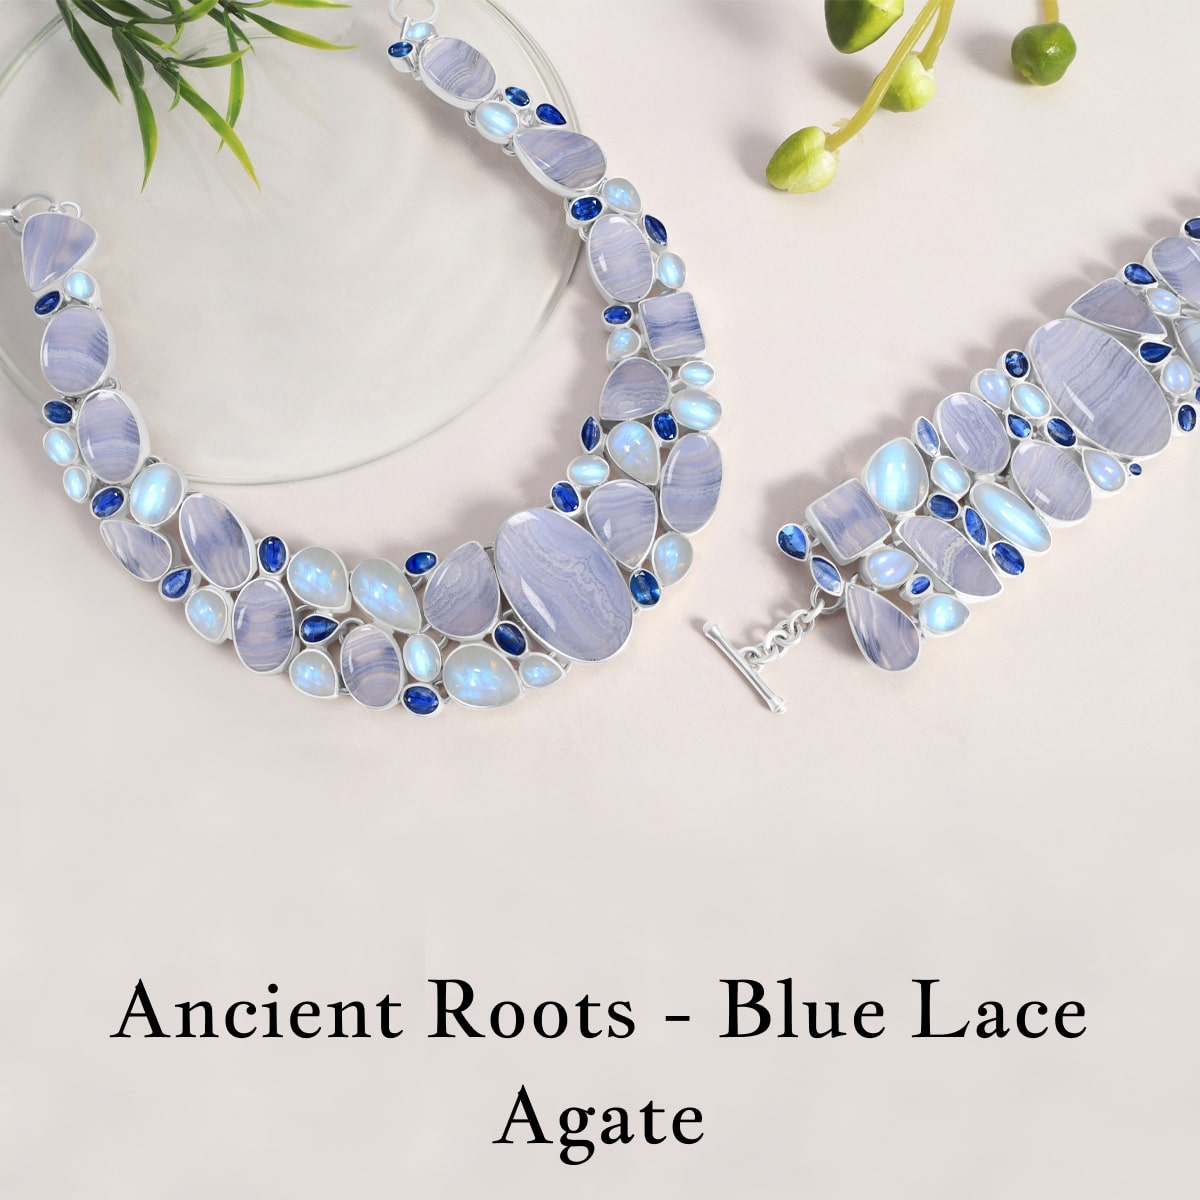 History Of Blue Lace Agate